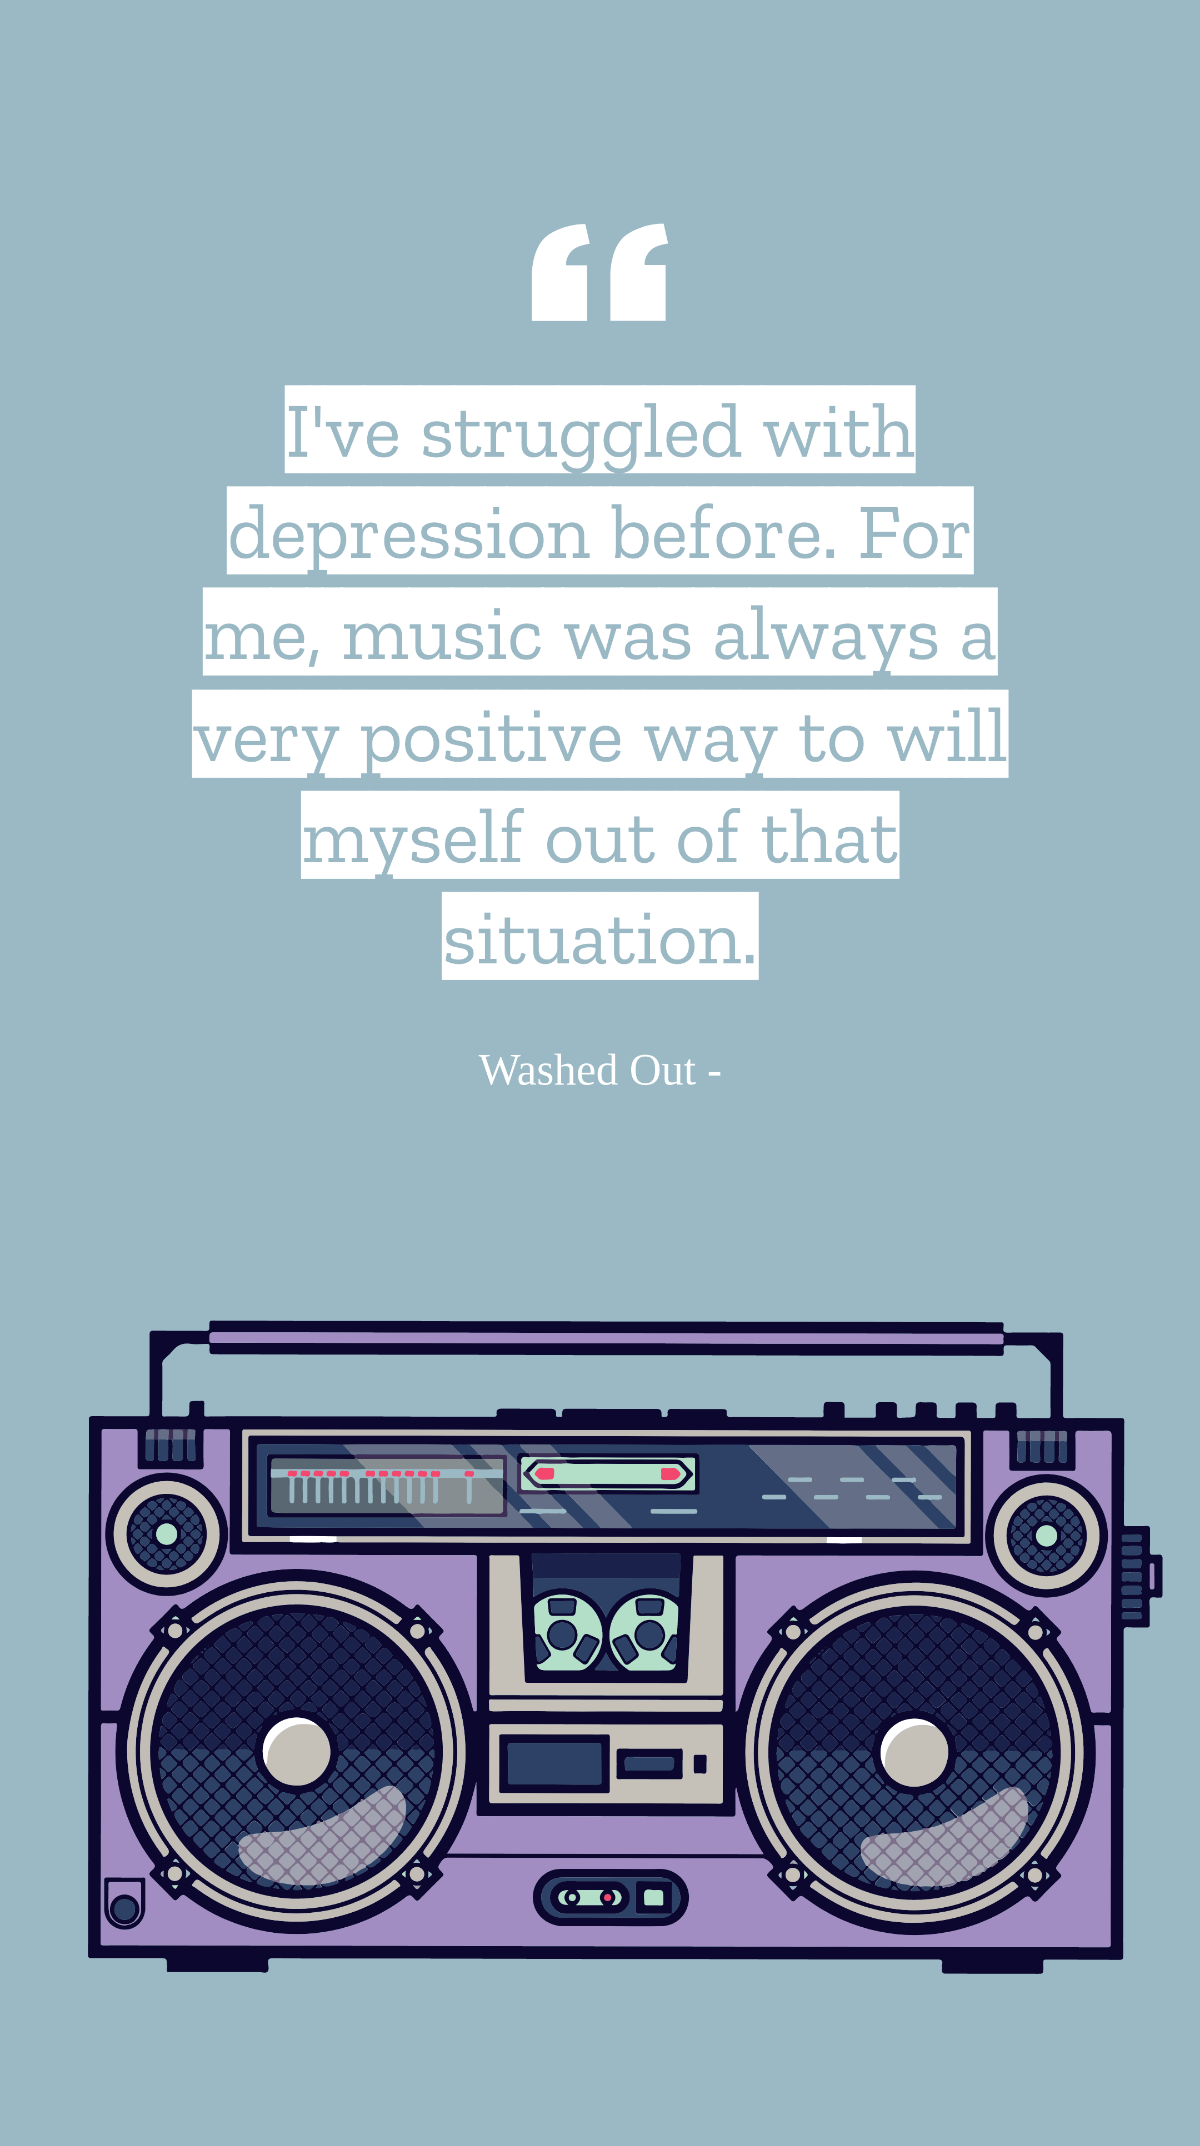 Washed Out - I've struggled with depression before. For me, music was always a very positive way to will myself out of that situation. Template